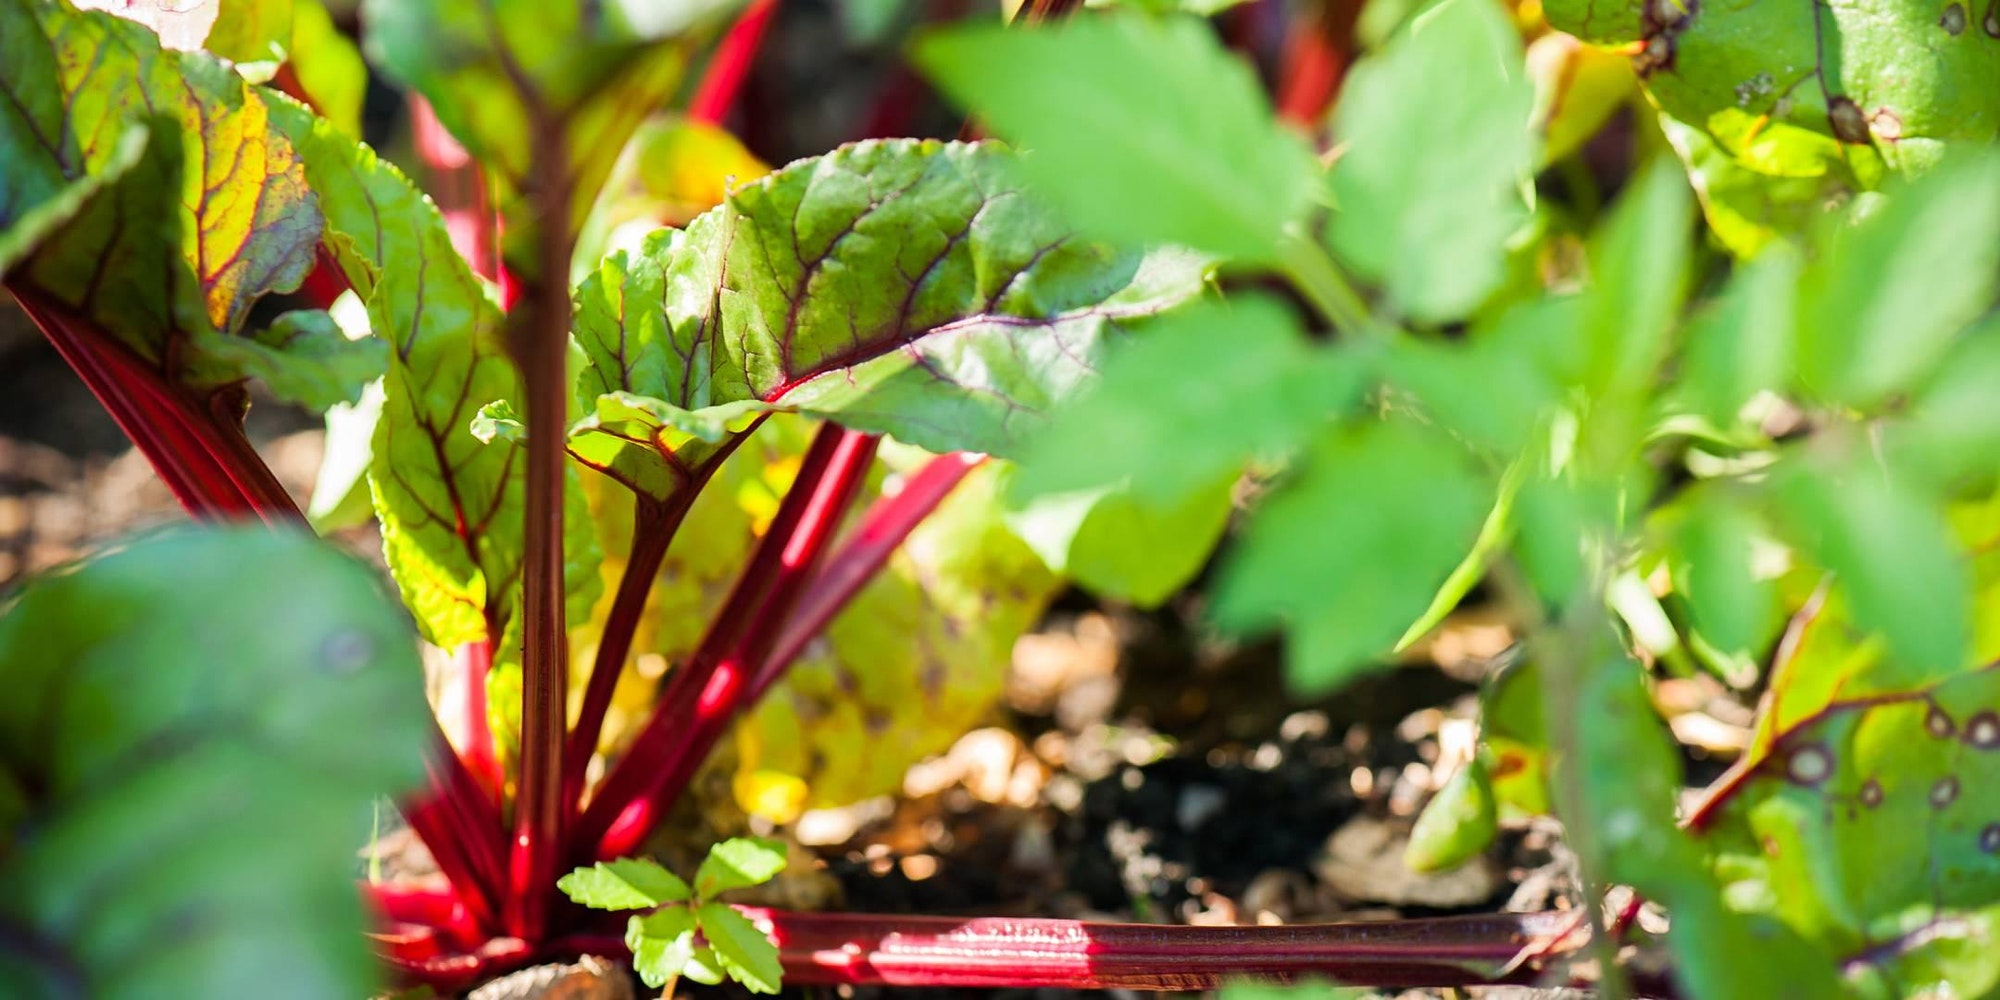 Close up of green leaves with red stalks - red rainbow chard